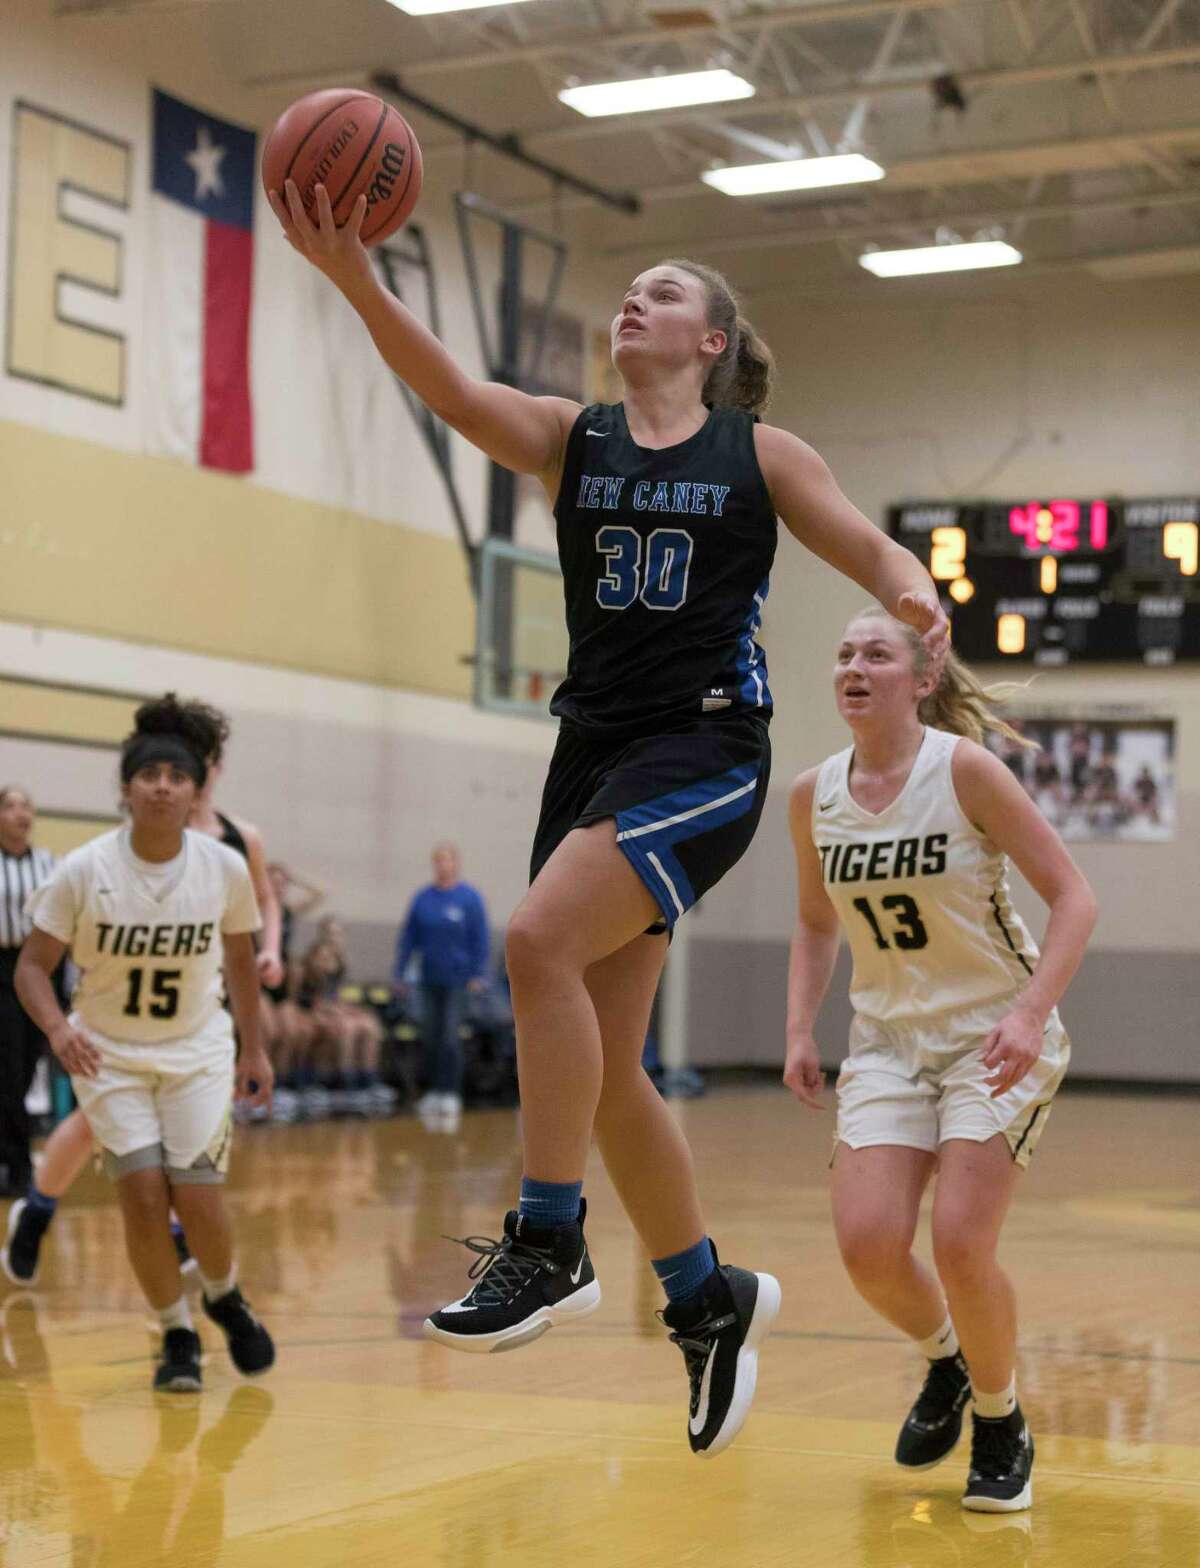 New Caney power forward Abigail Lynch (30) shoots a layup past Conroe guards Daniela Galindo (15) and Sarah Sowell (13) in the first quarter of a high school girls basketball game during the Lady Tiger Classic at Conroe High School, Thursday, Nov. 14, 2019, in Conroe.